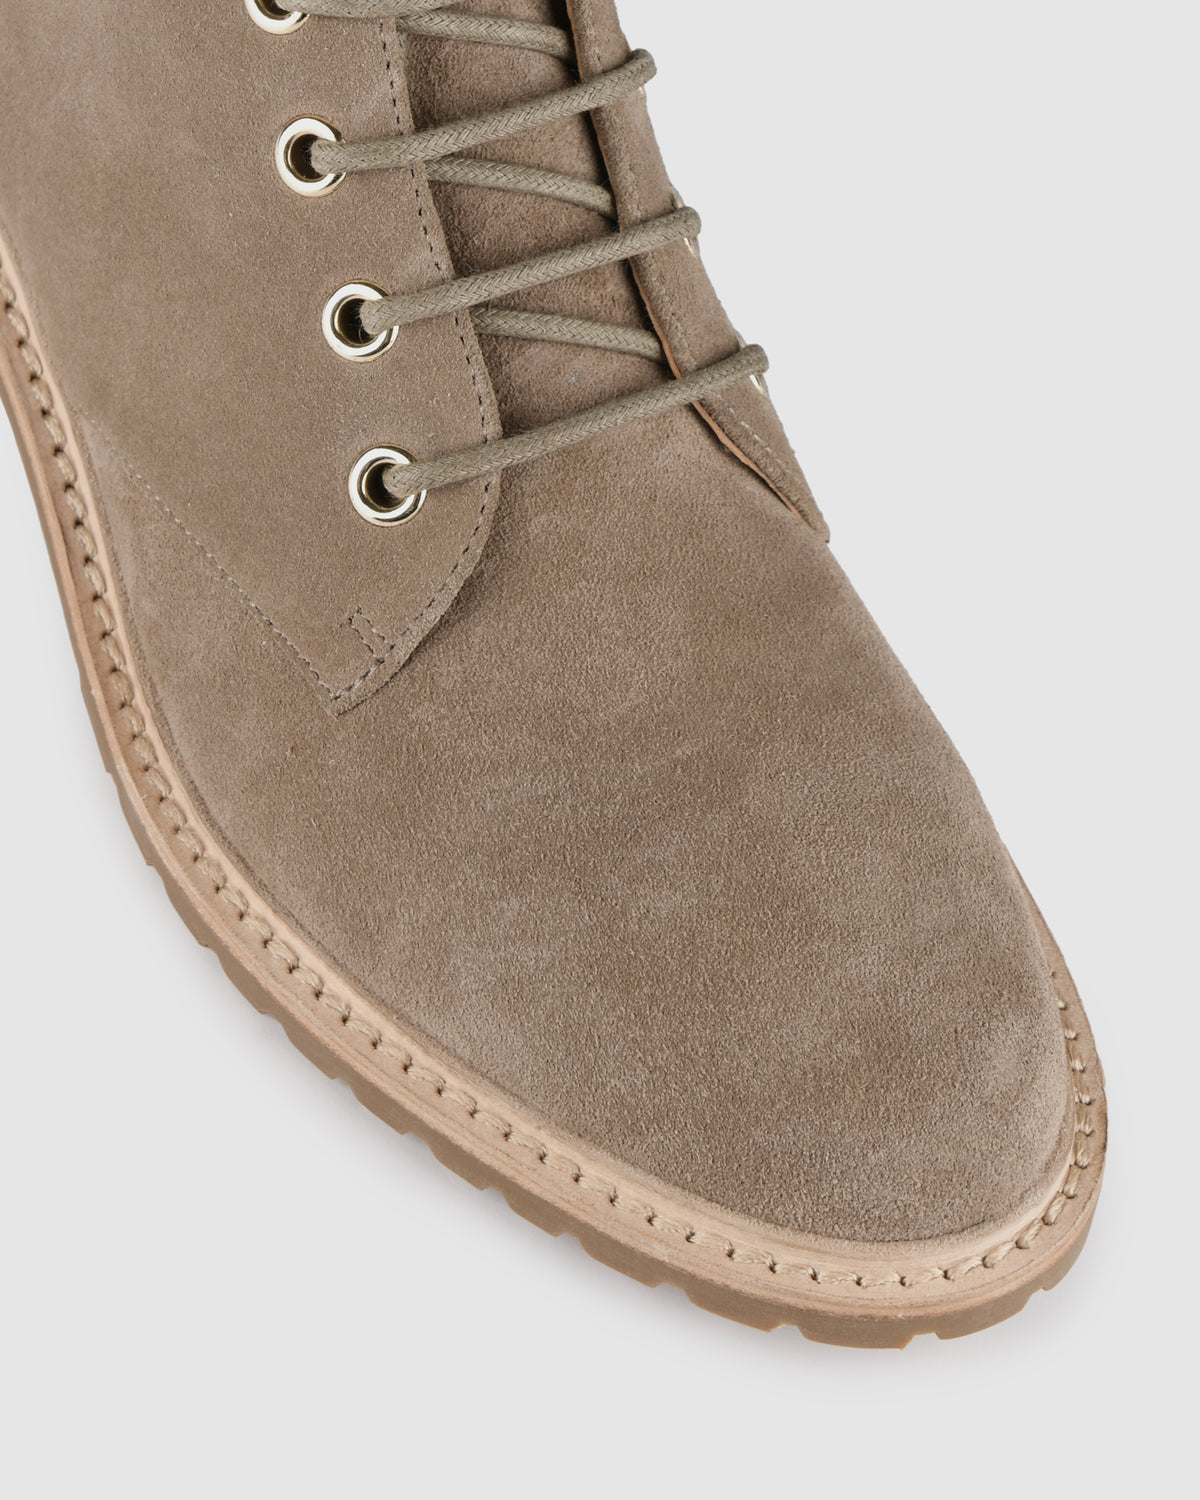 FRANCES FLAT ANKLE BOOT TAUPE SUEDE